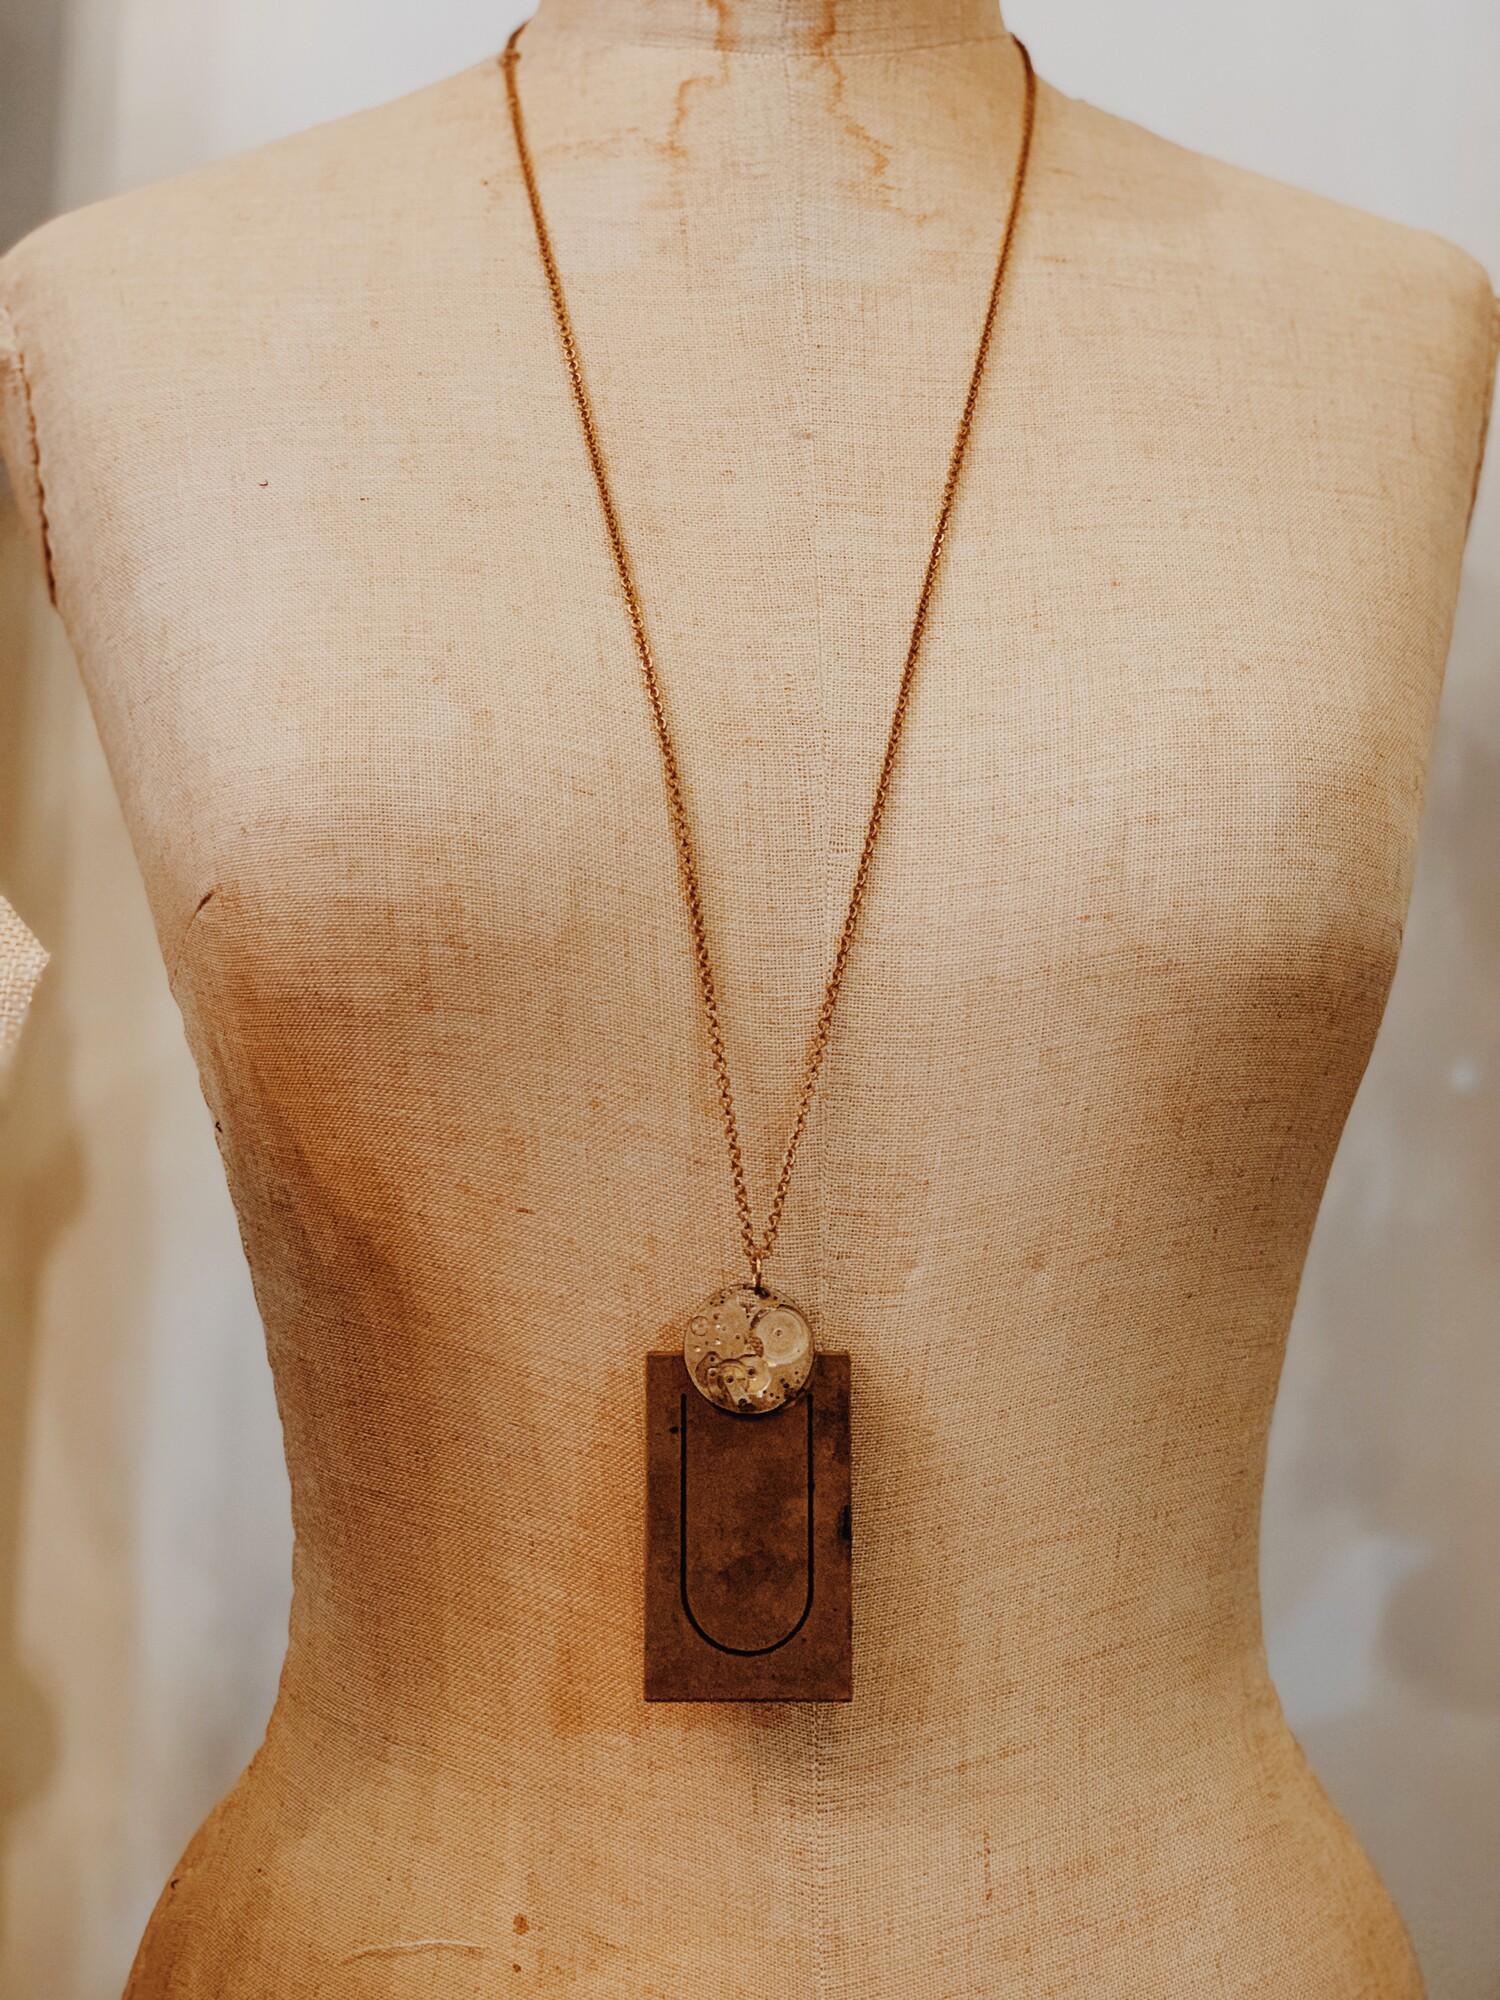 This lovely, handmade necklace is truly one of a kind! It was elegantly crafted and has a U initialed brass plate. It is on a 32 inch chain.